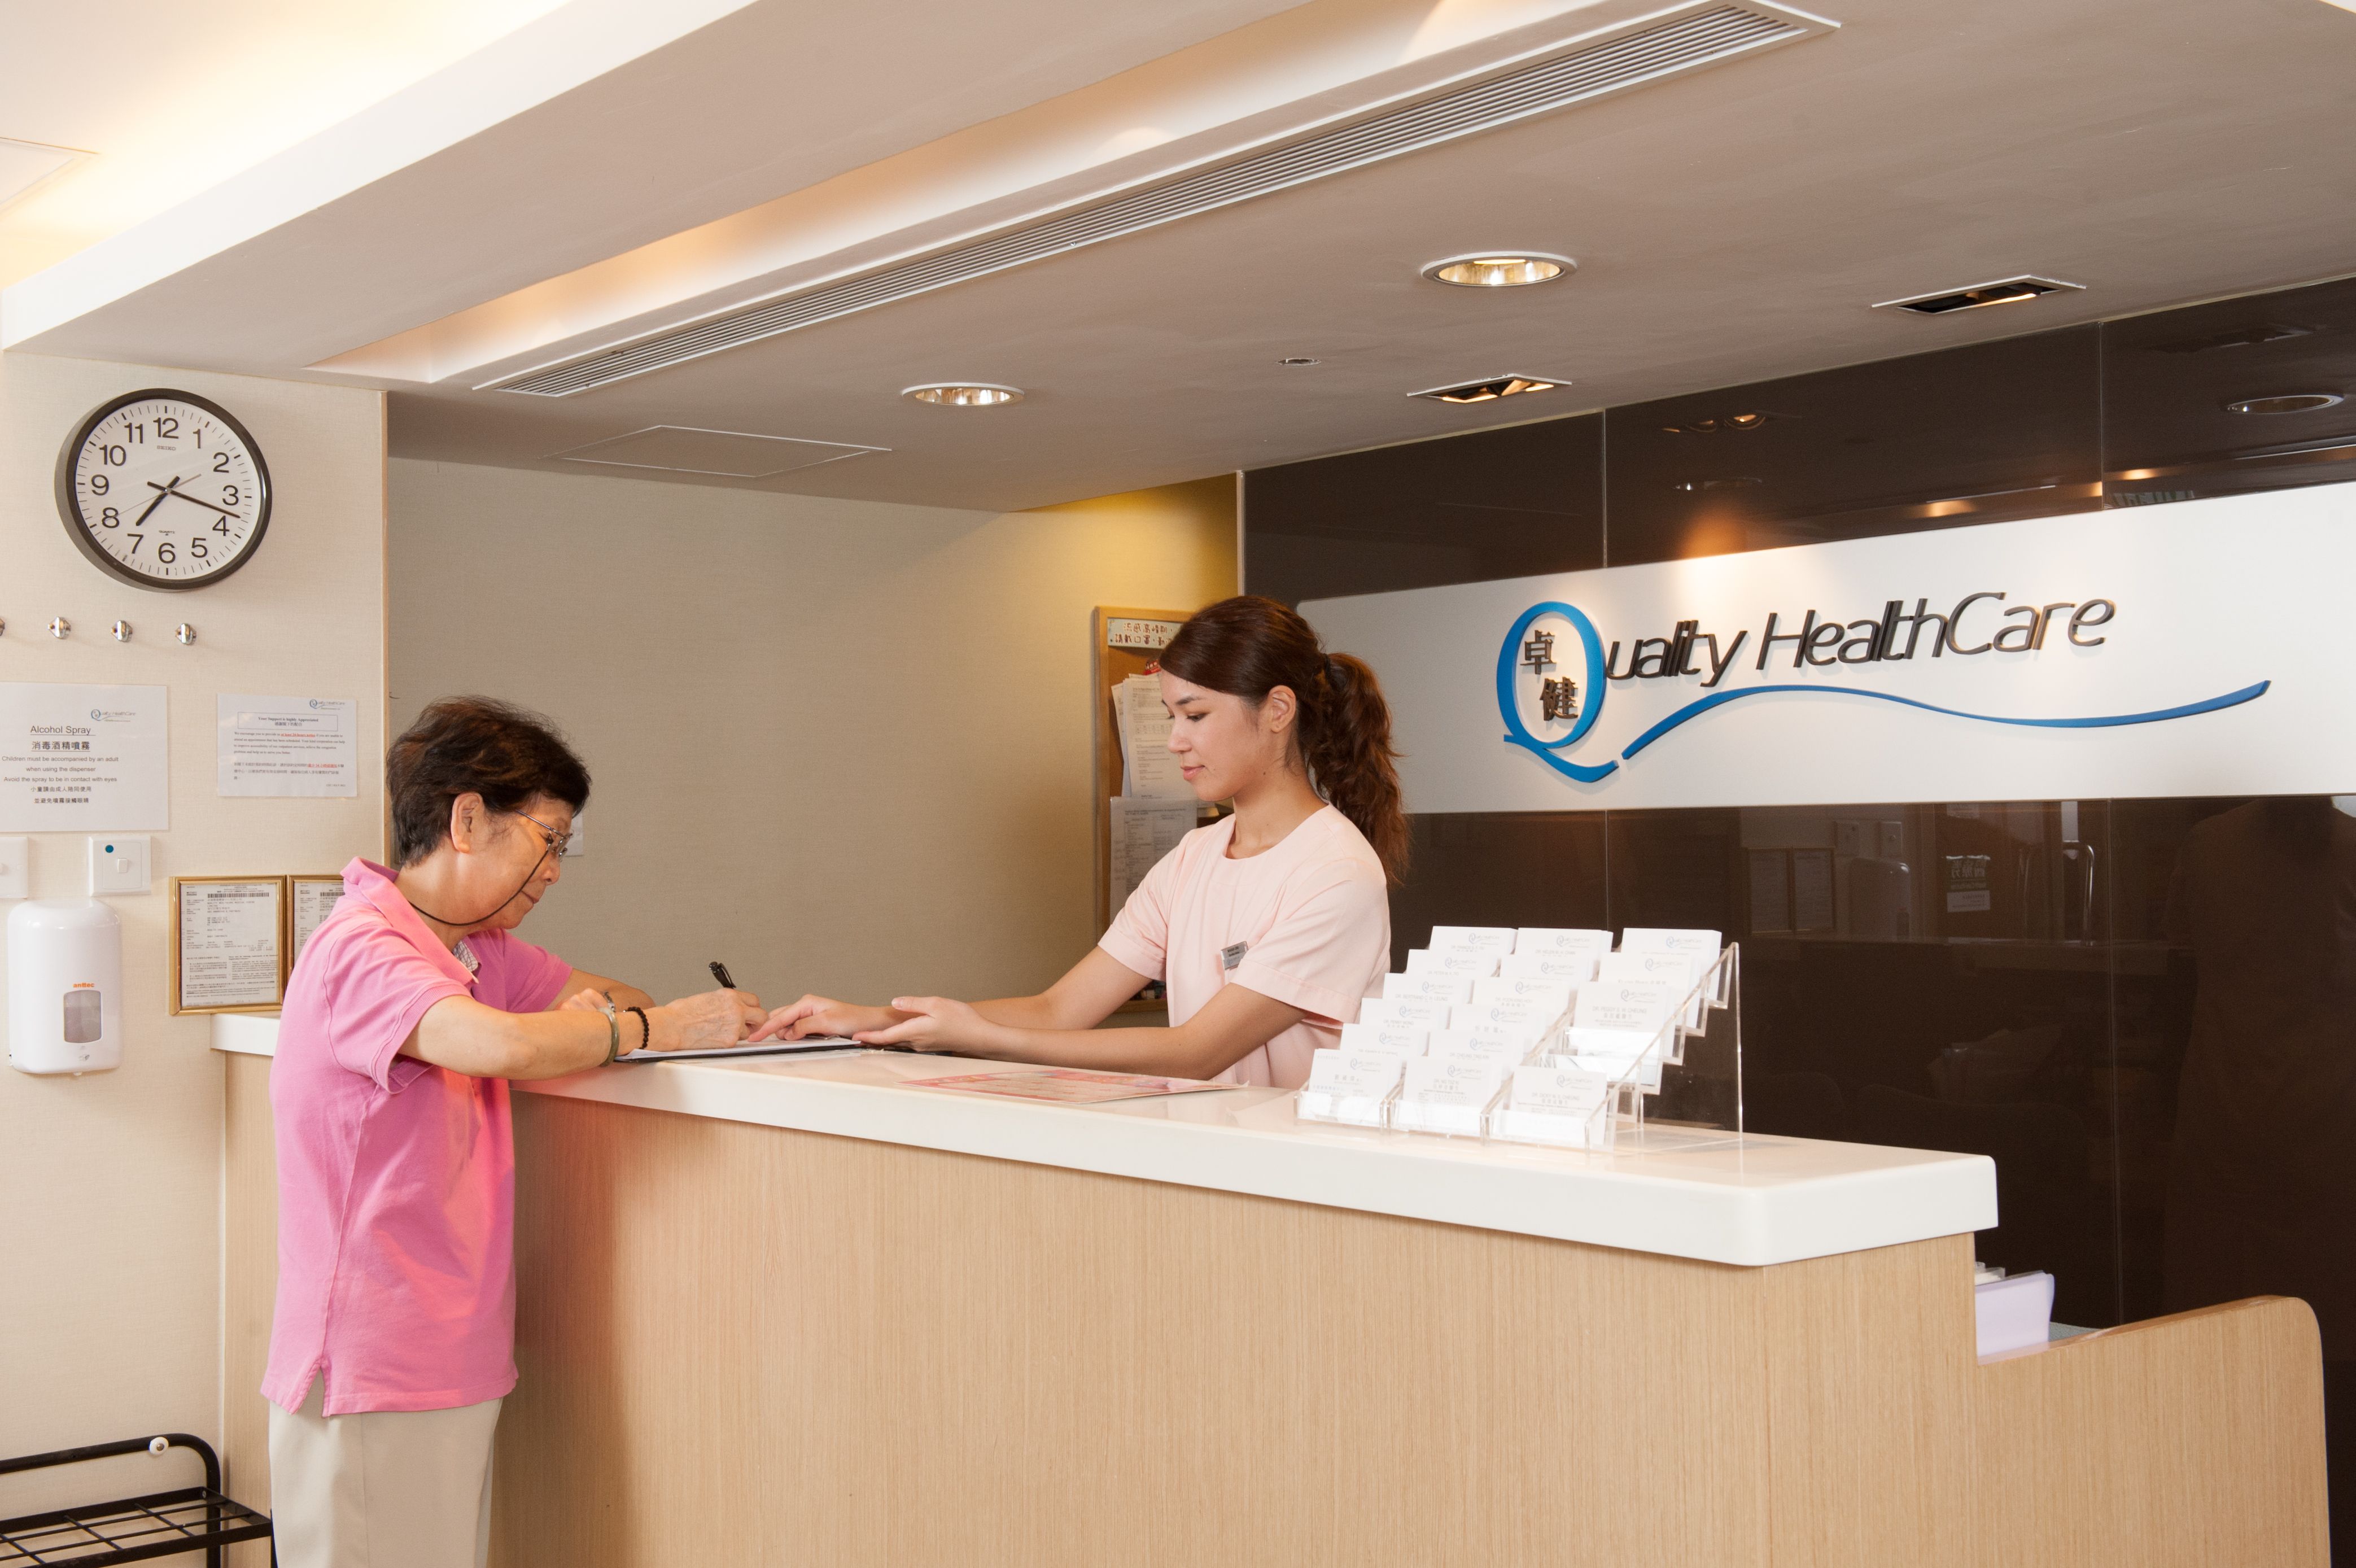 Nurse and patient at Quality HealthCare Medical Centre reception